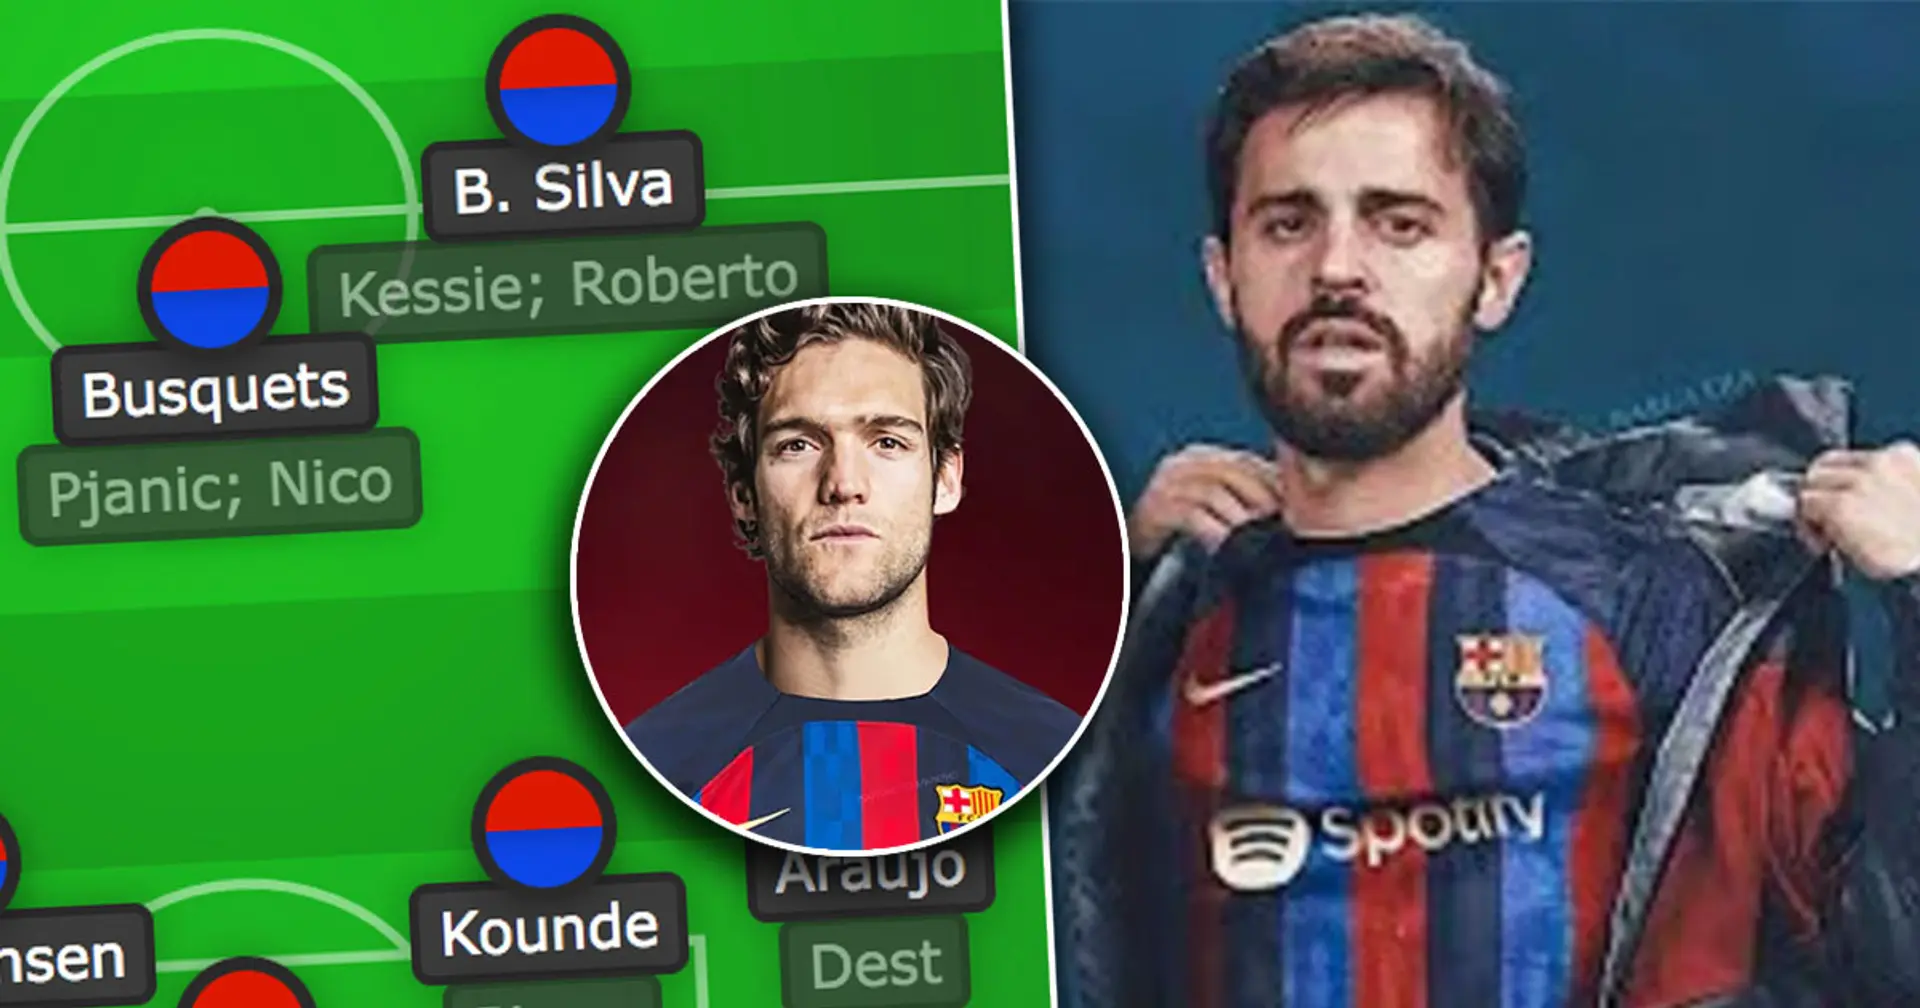 Barca's 24-man squad for 2022/23 season if all latest transfer rumours are true